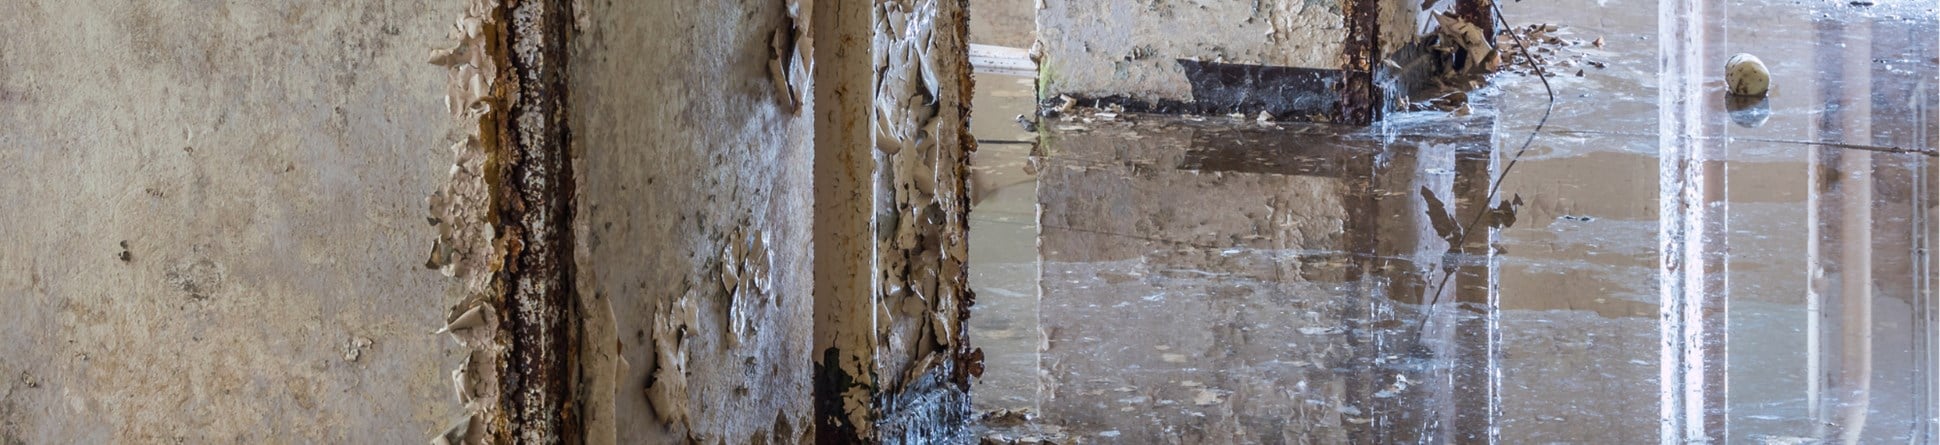 Water floods the floor of a building. Peeling paint falls from columns and fills the puddles.